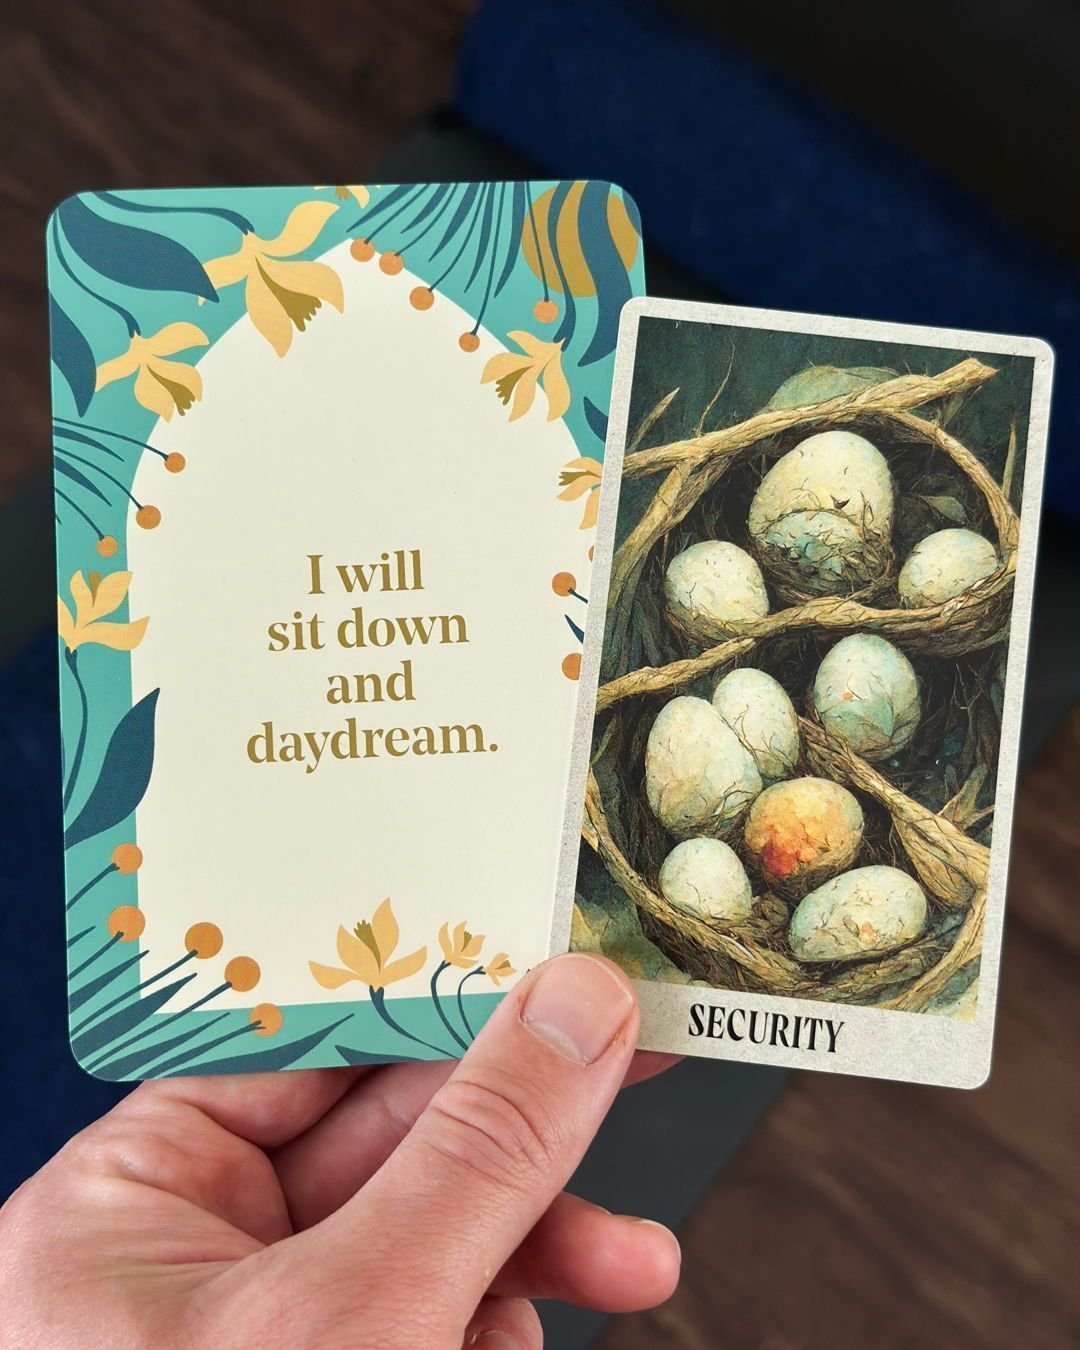 What are you dreaming of?

Last night, I led a Restore &amp; Rest class that was inspired by card pulls from @betweenworldsdeck and the Rest Deck from @thenapministry. We received &ldquo;Security&rdquo; and &ldquo;I will sit down and daydream,&quot; 